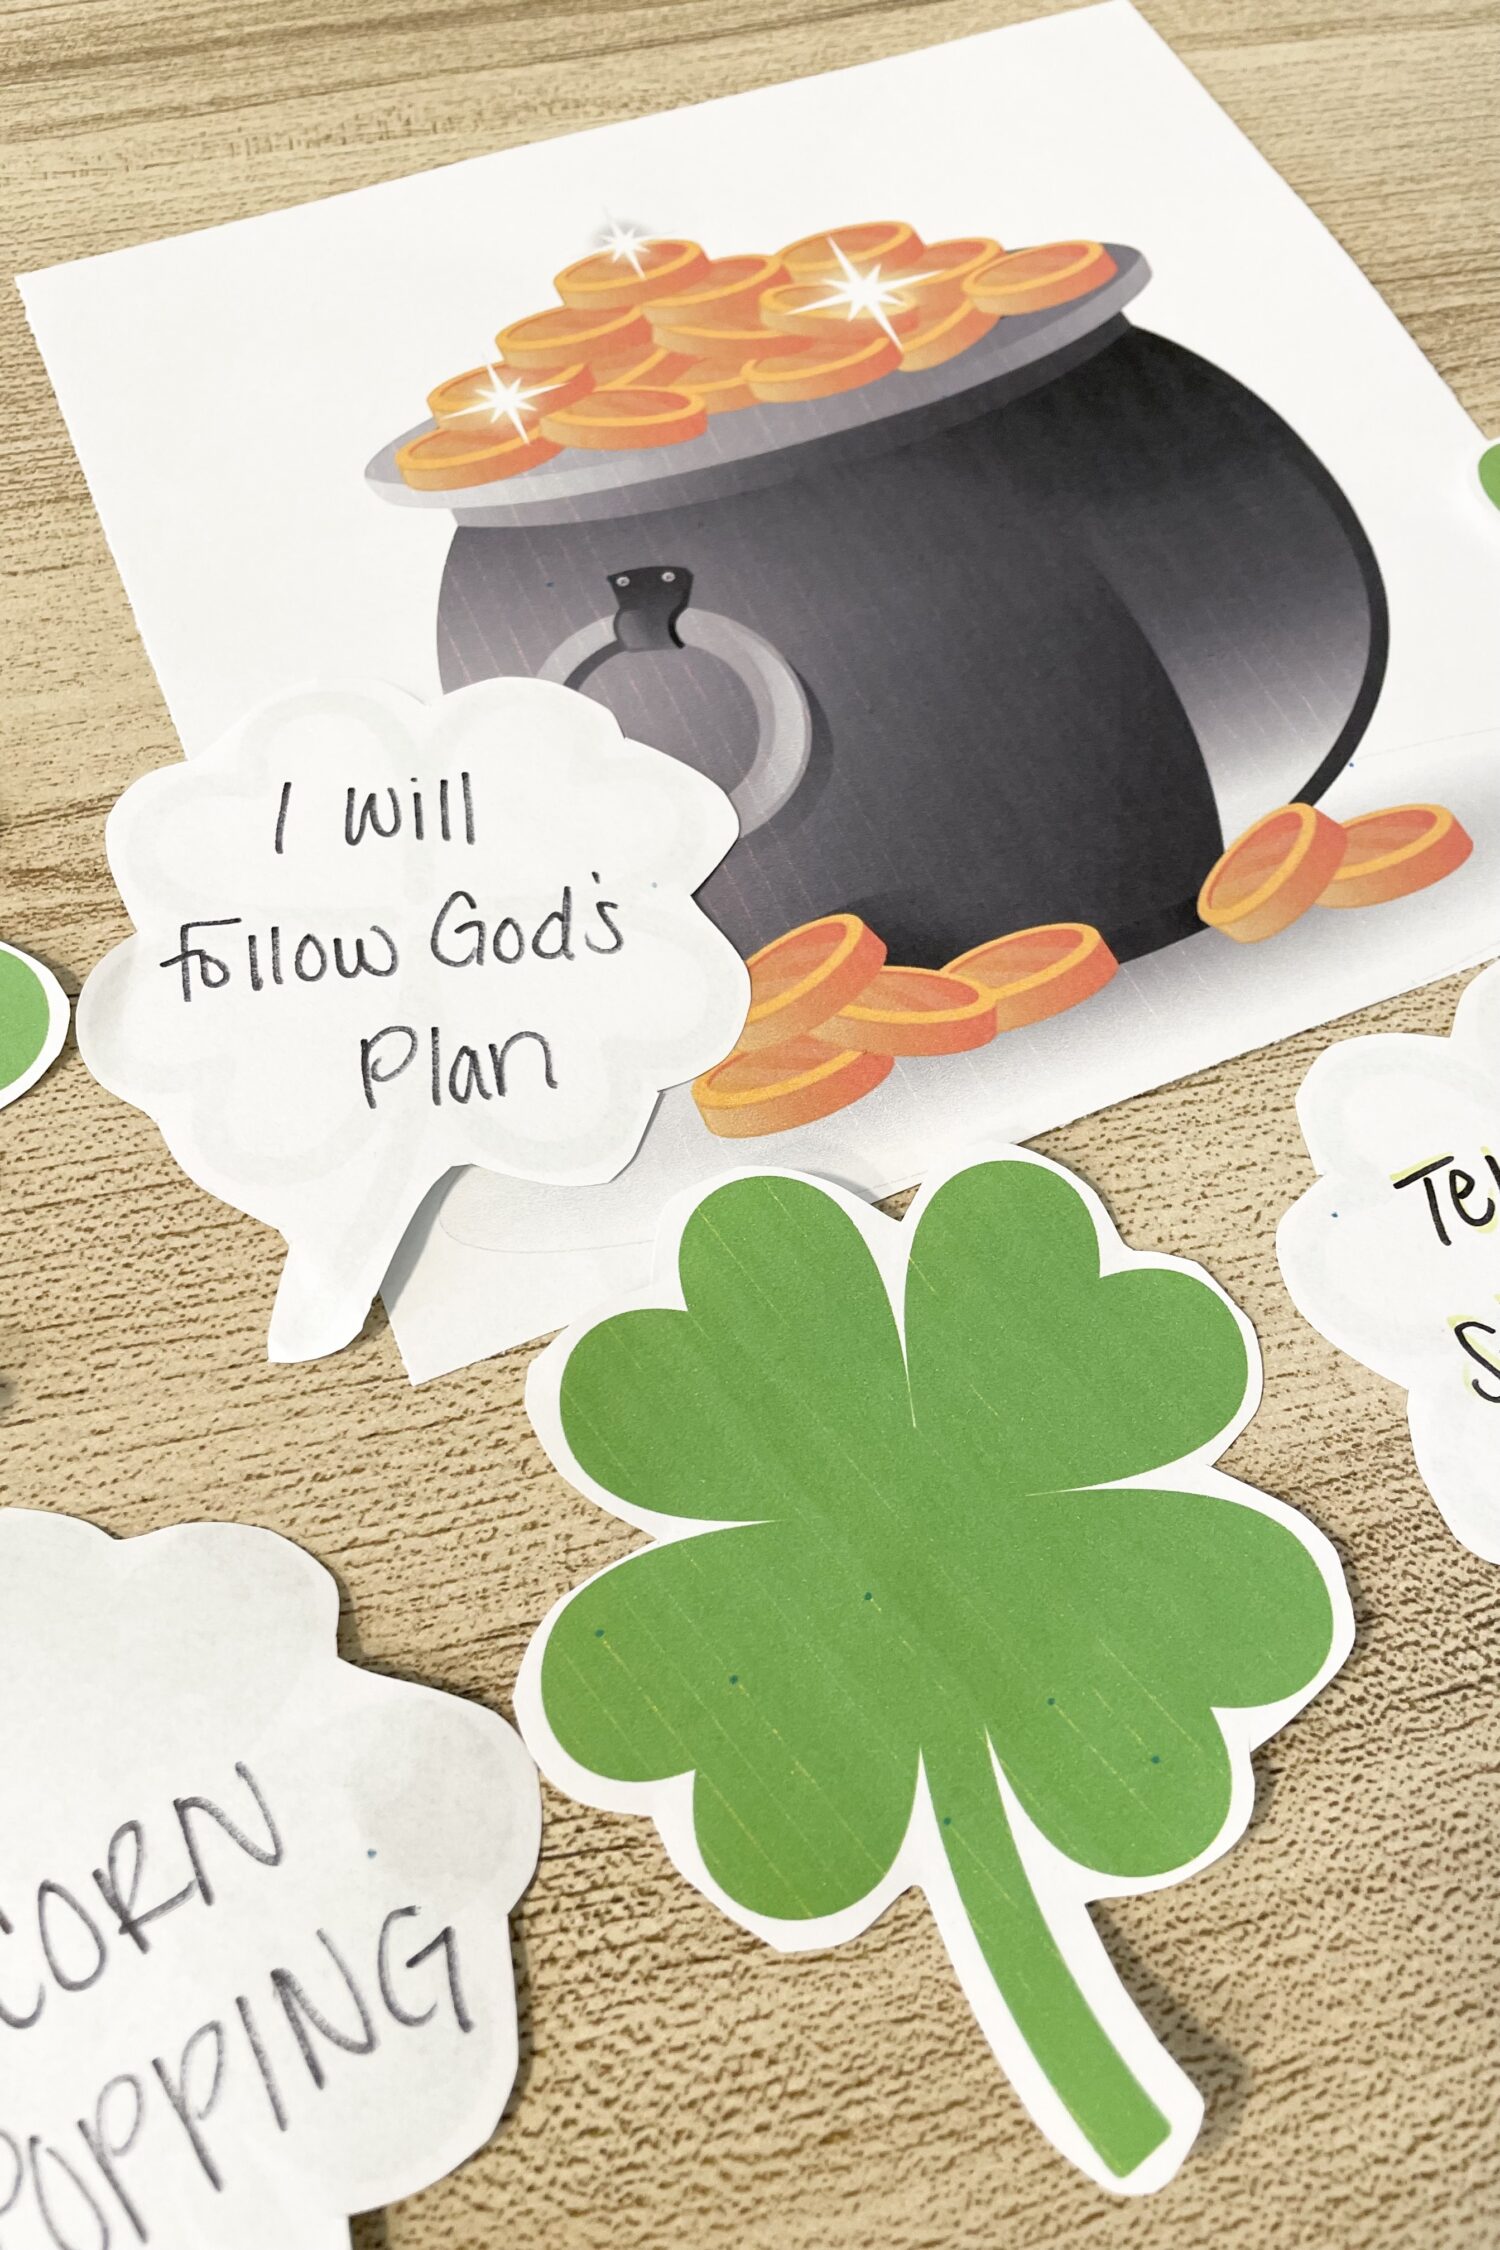 Use this fun St. Patrick's Day Pot of Gold Bean Bag Toss activity in primary. Toss the bean bag in the pot of gold or land in on a clover and sing a primary song for LDS Primary Singing Time Music Leaders.